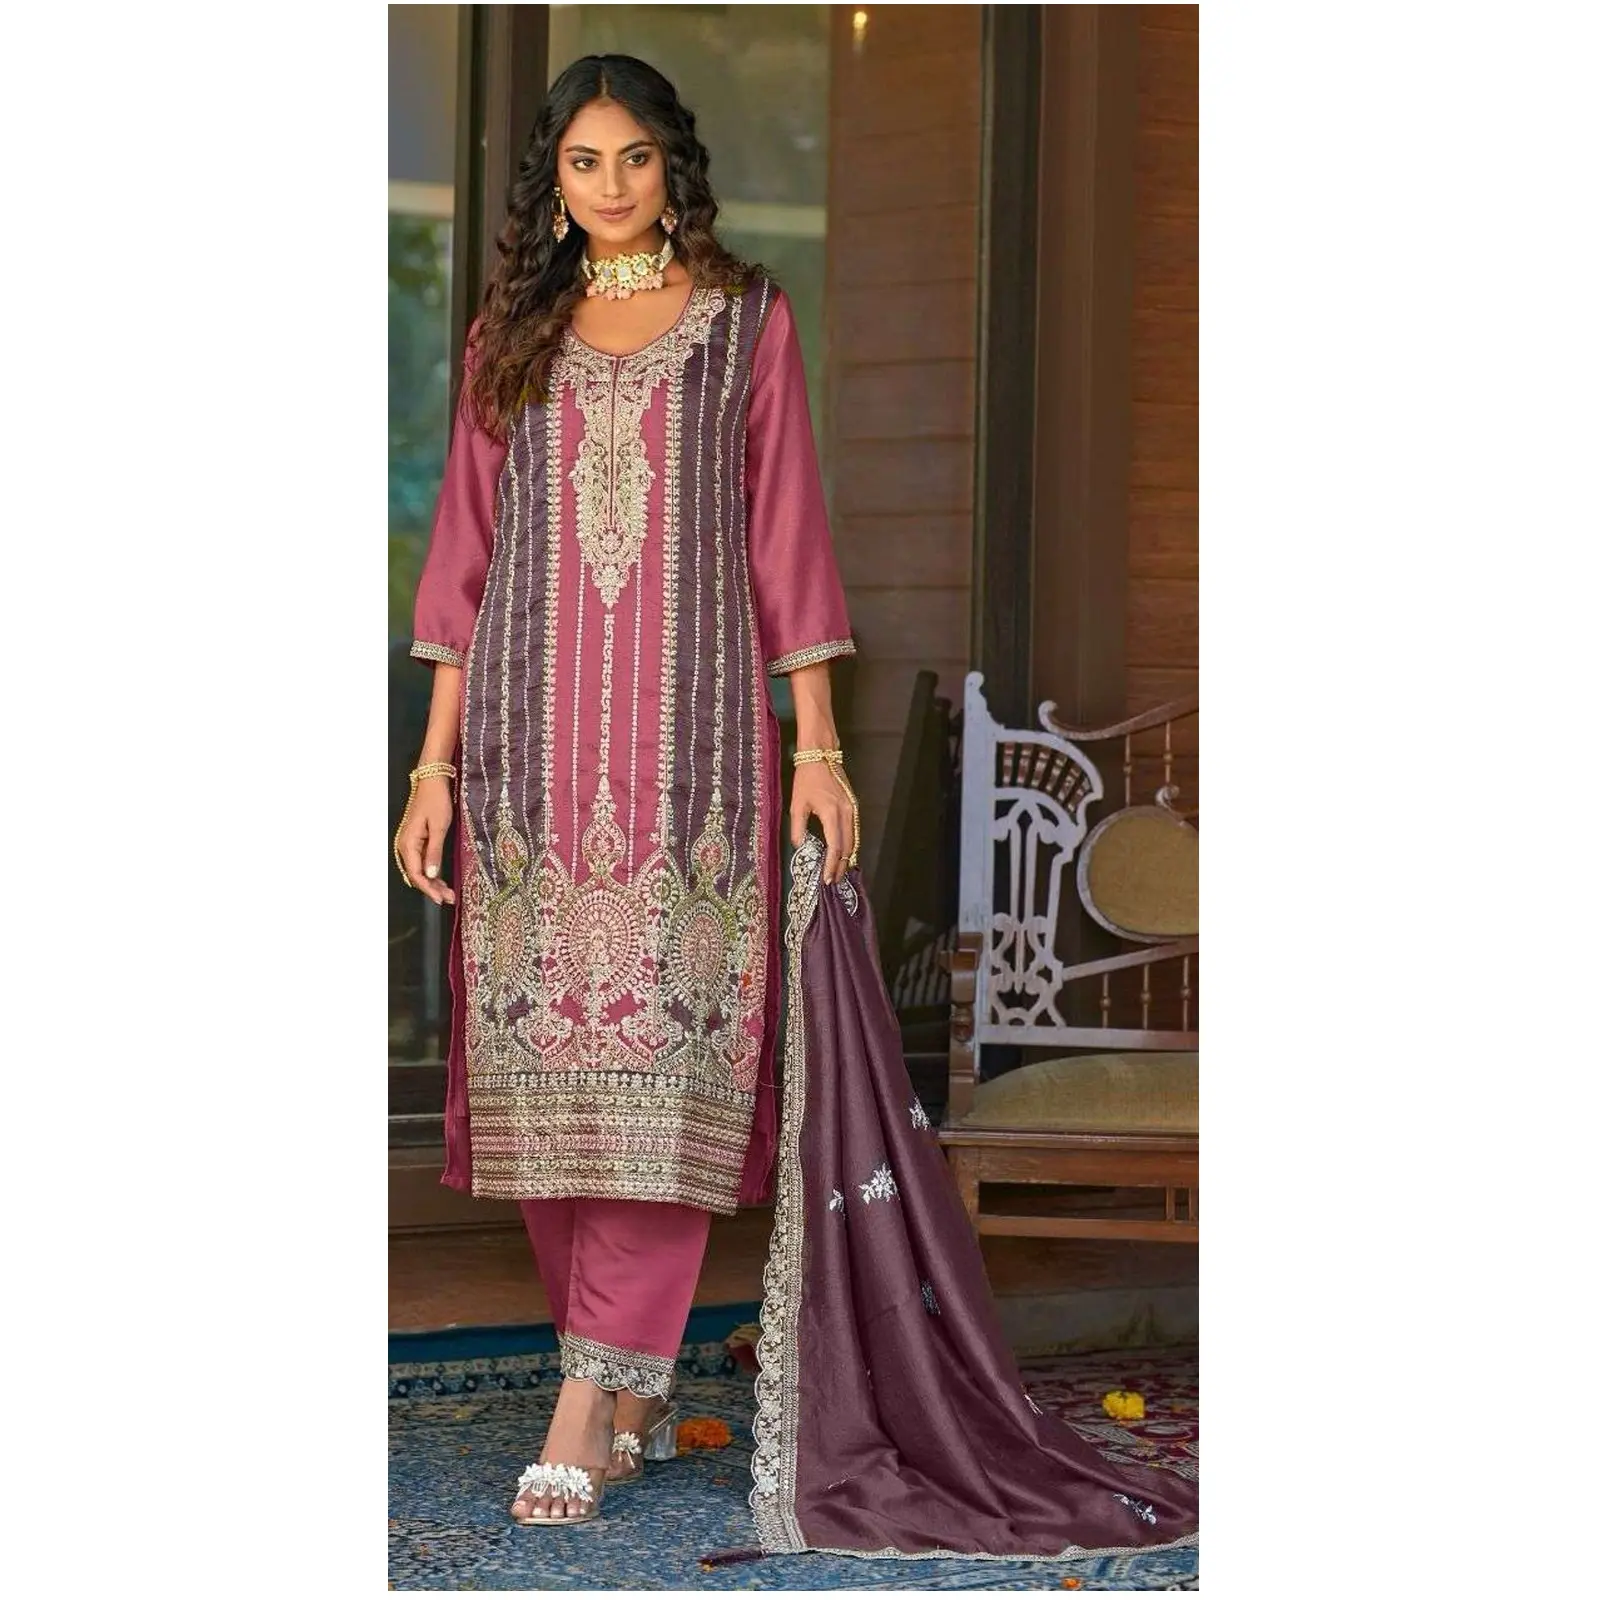 Designer Pakistani Styles Salwar Kameez Suit with Heavy Vichitra With Embroidery Codding Sequence Work